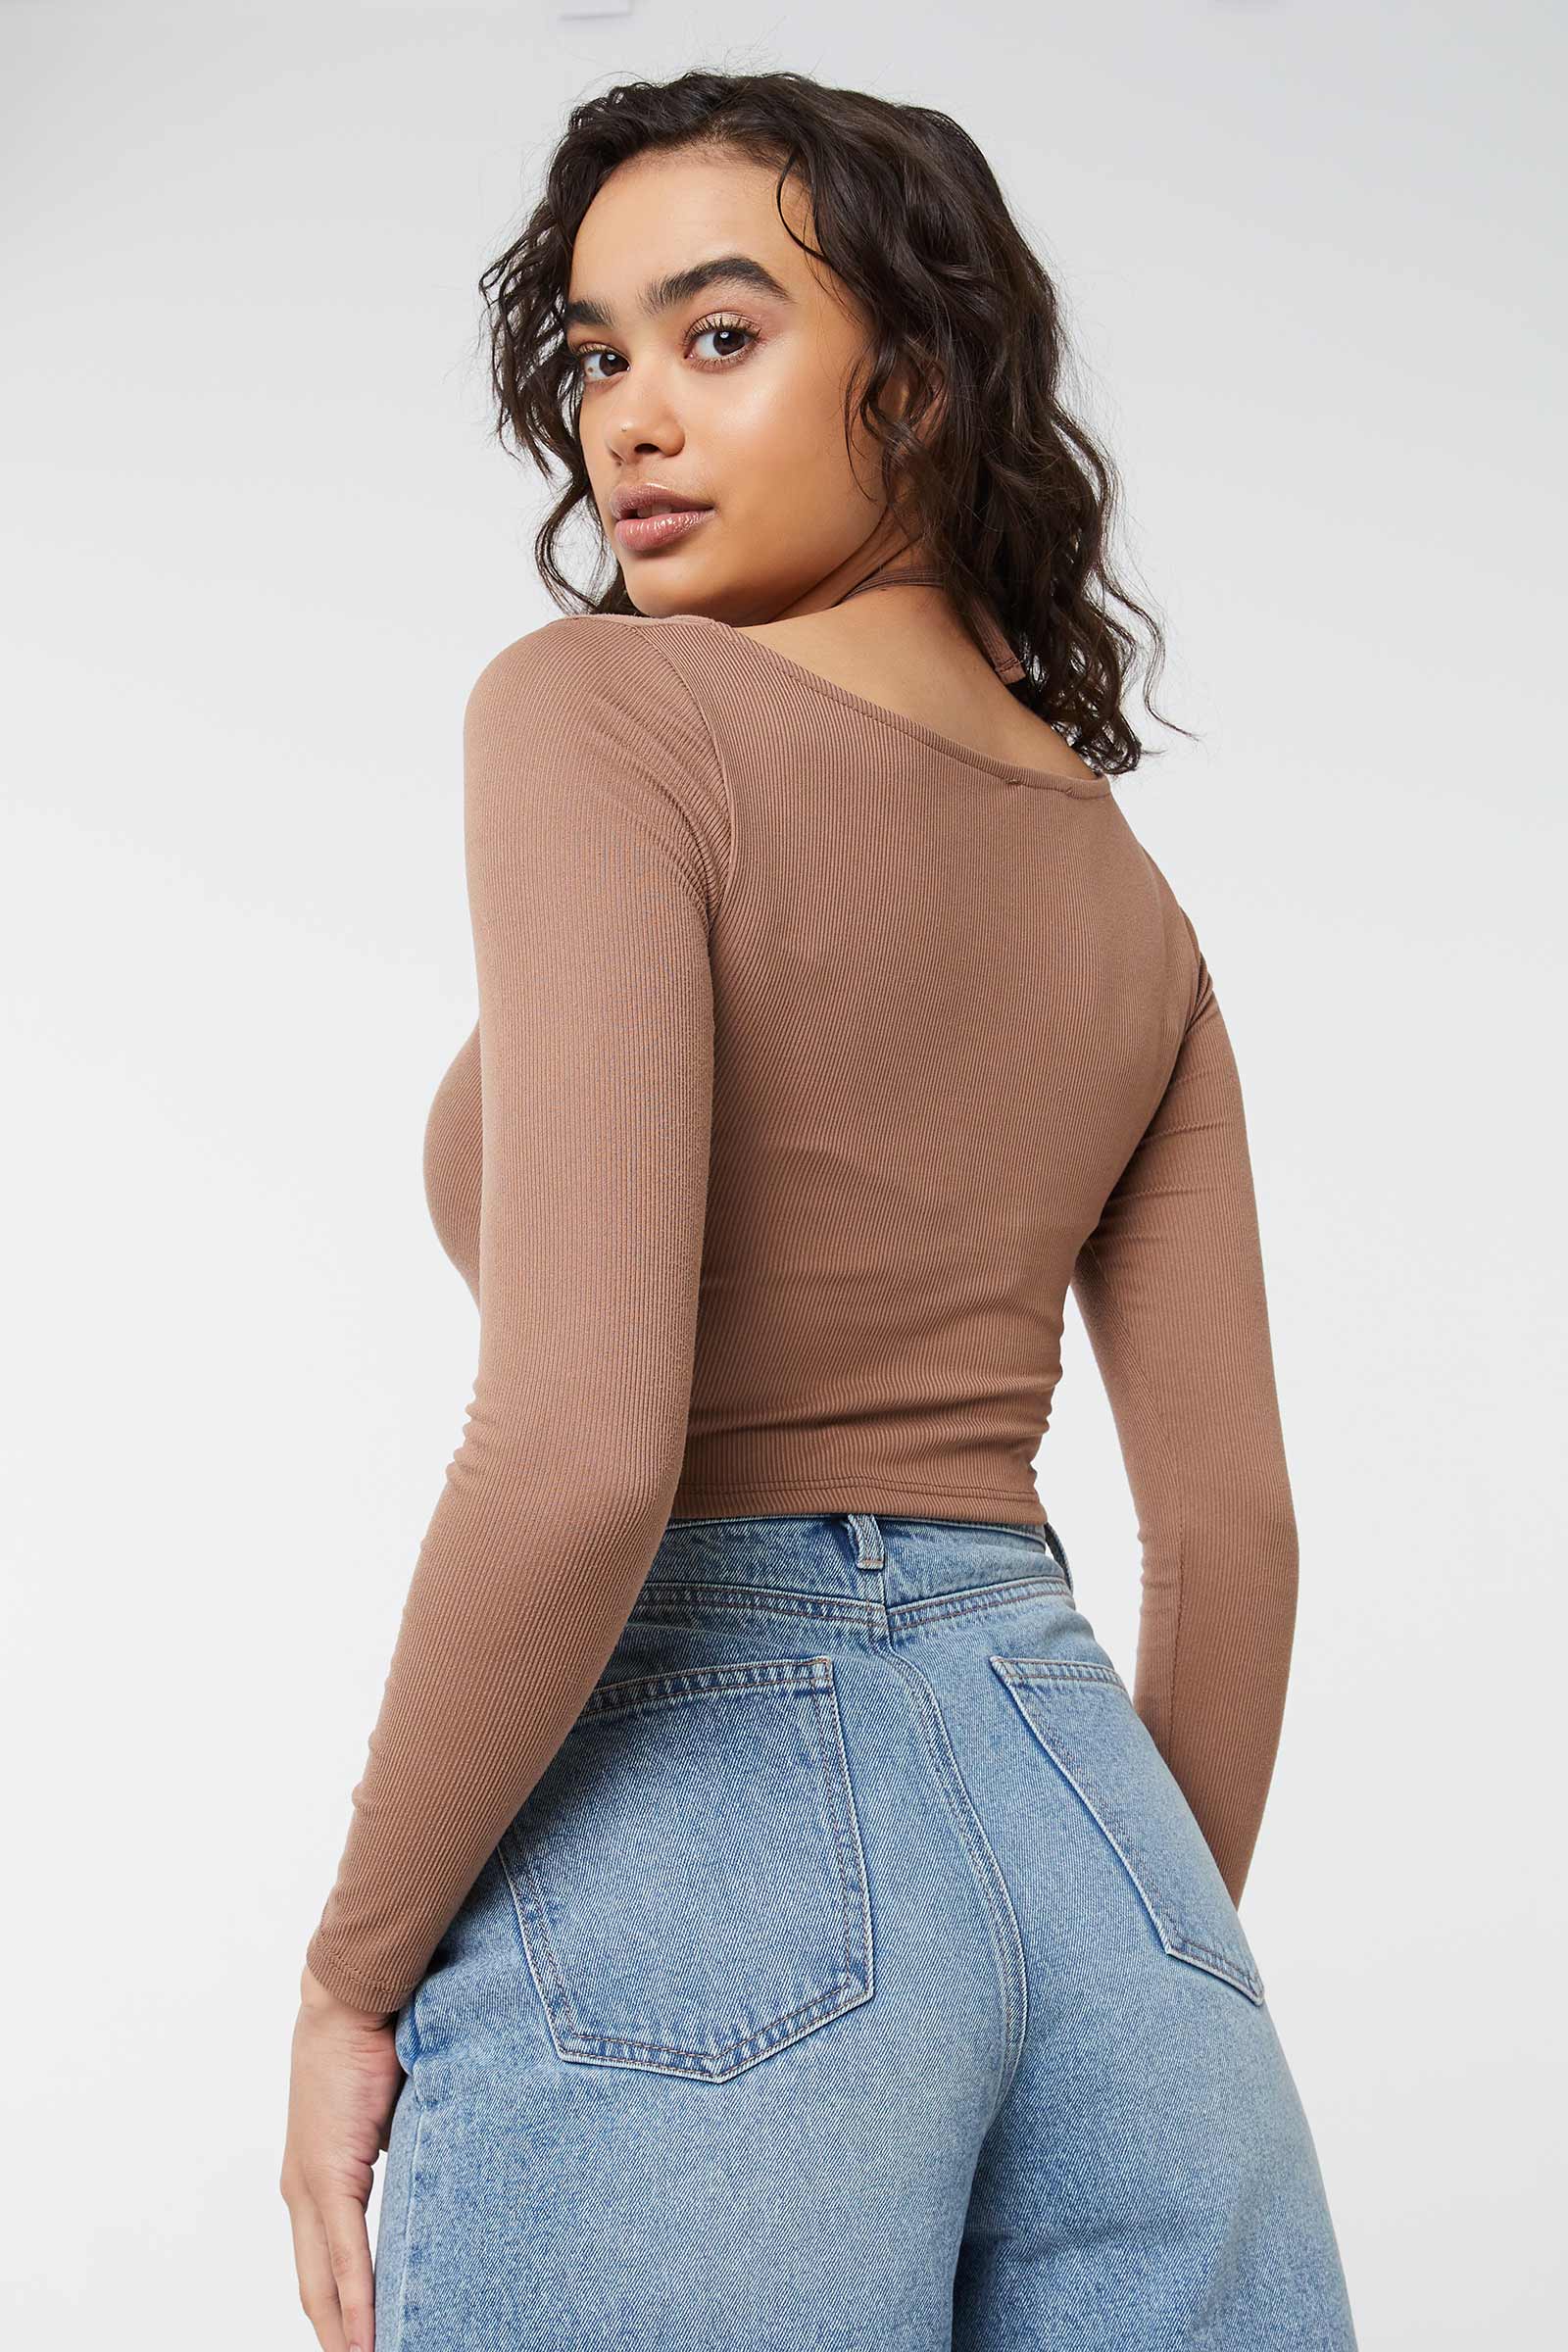 Ruched Ultra-Crop Top with Tie Neck